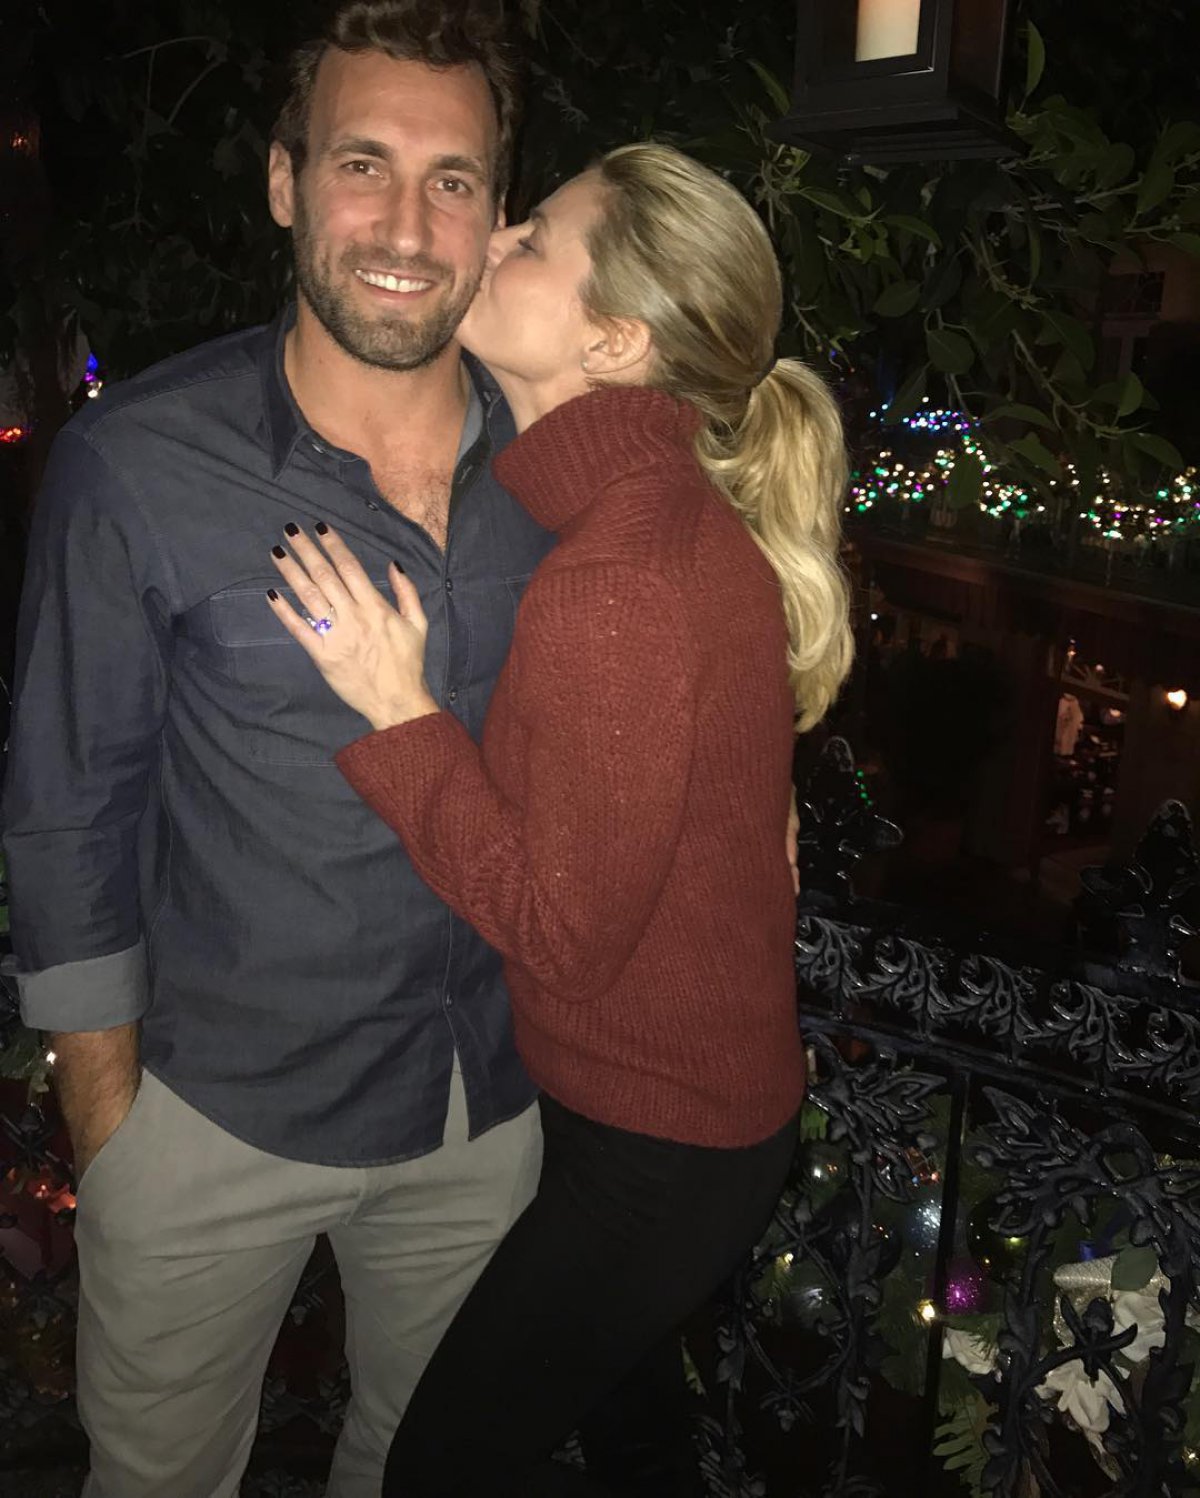 Erin Andrews gushes about Disneyland engagement to Jarret Stoll: 